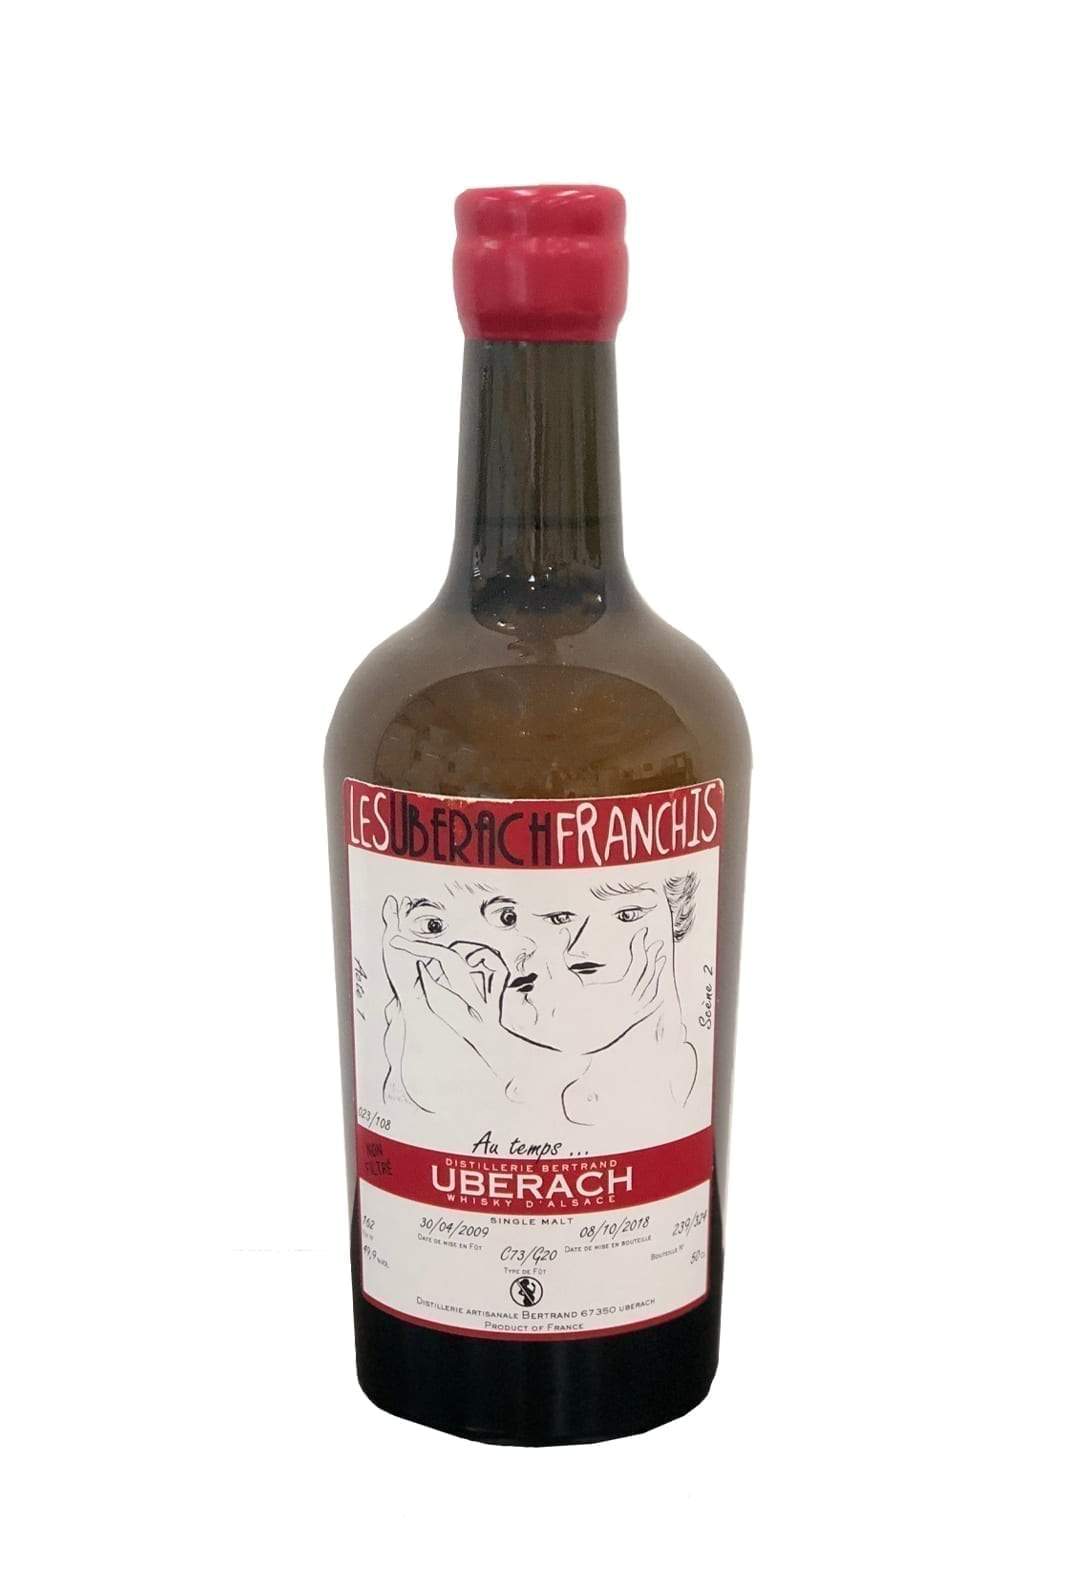 Bertrand Uberach Franchis Single Cask 9 years 49.9% 500ml | Whiskey | Shop online at Spirits of France